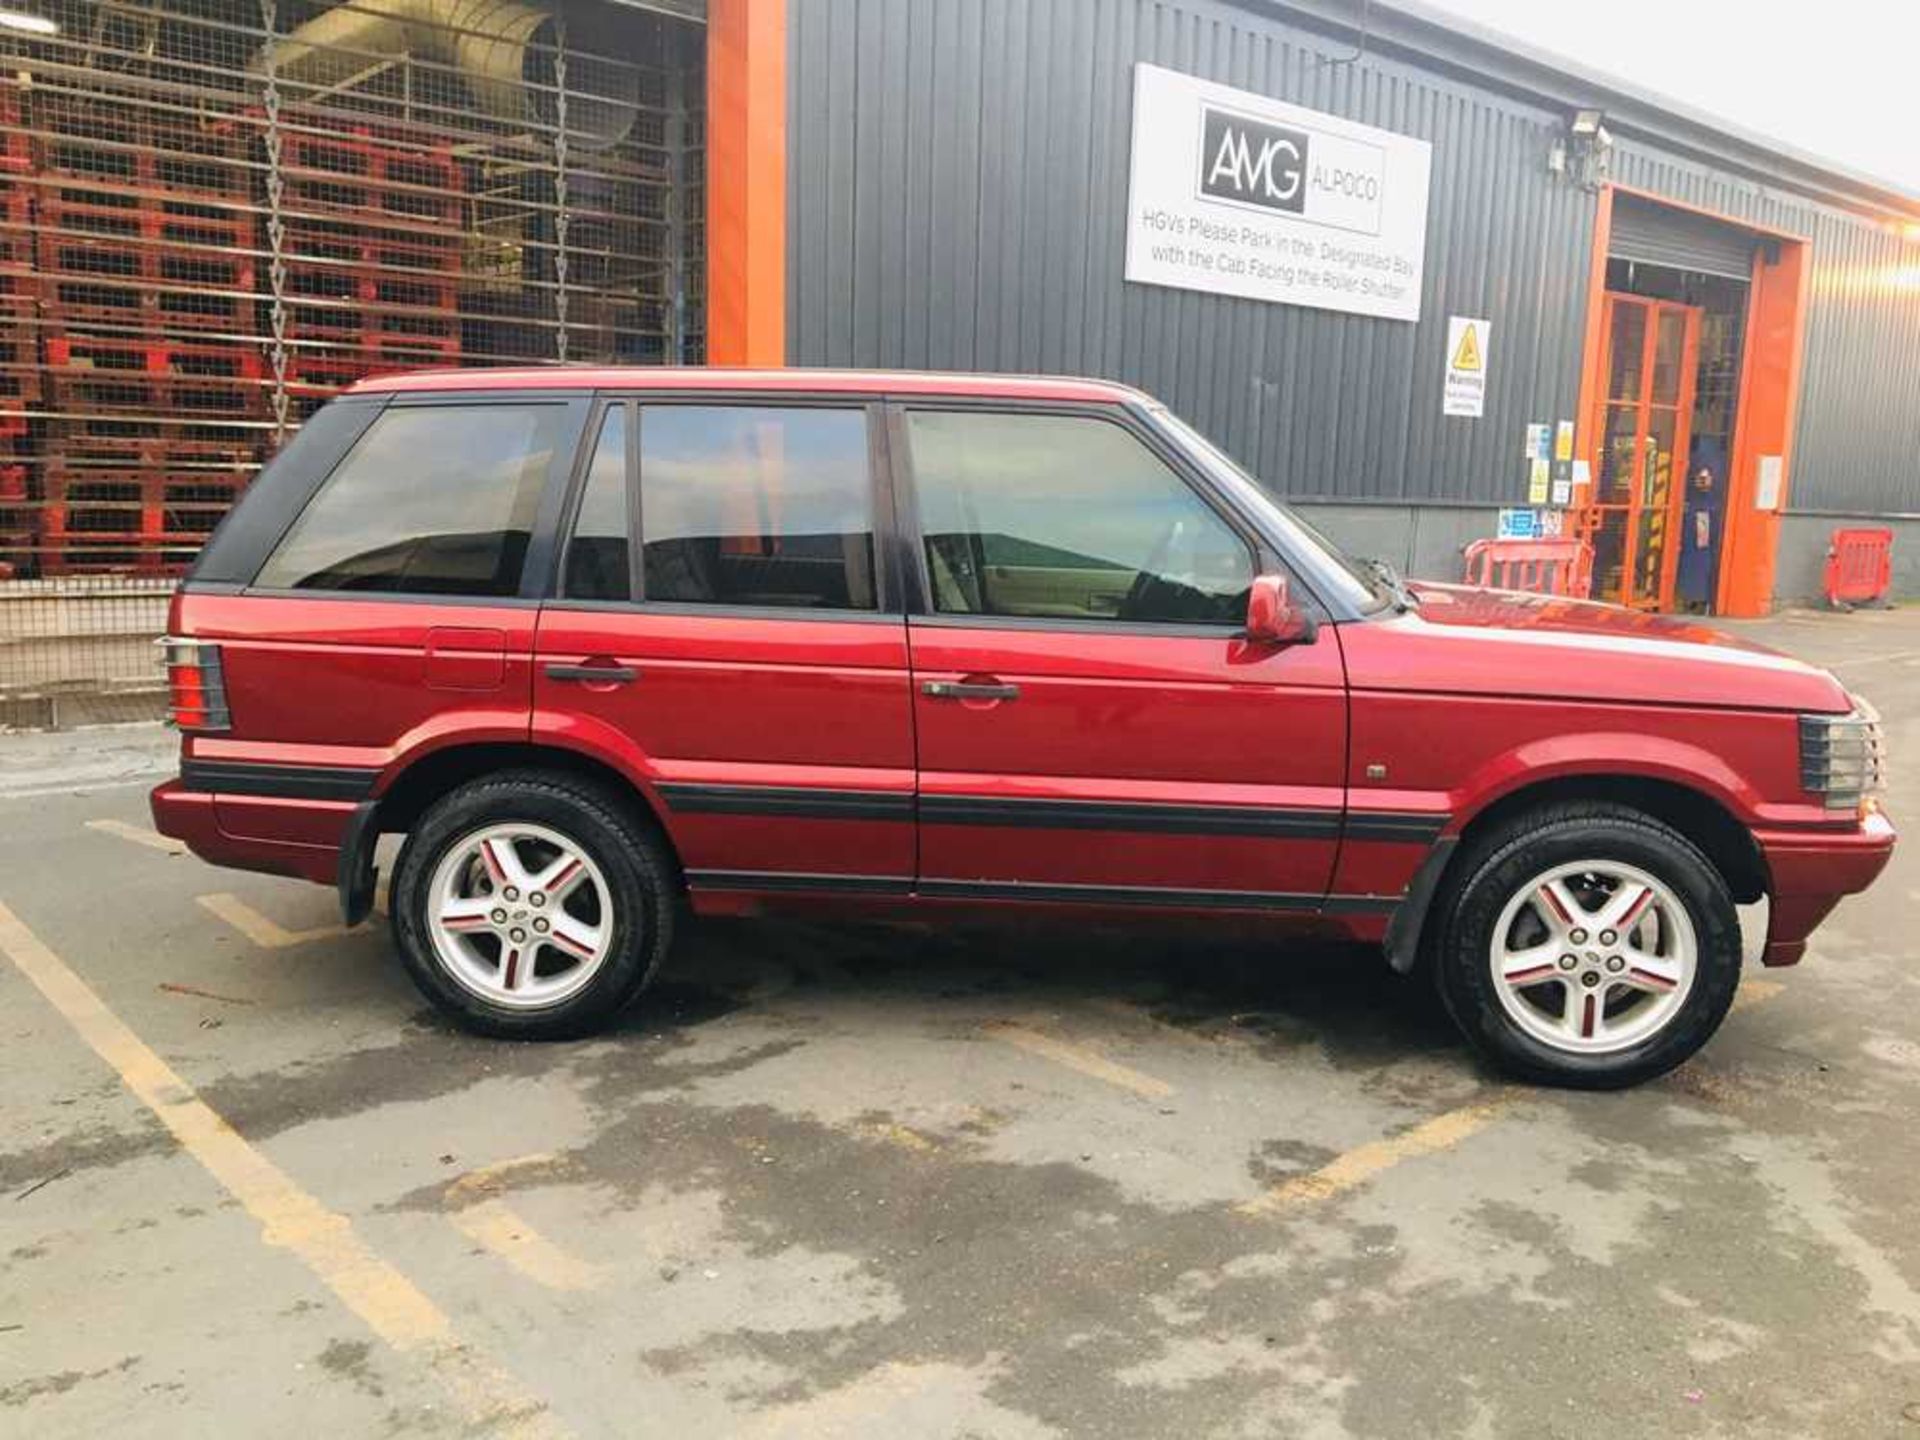 2001 Range Rover 2.5 TD Bordeaux One of just 200 UK-supplied limited edition 'Bordeaux' examples - Bild 10 aus 20